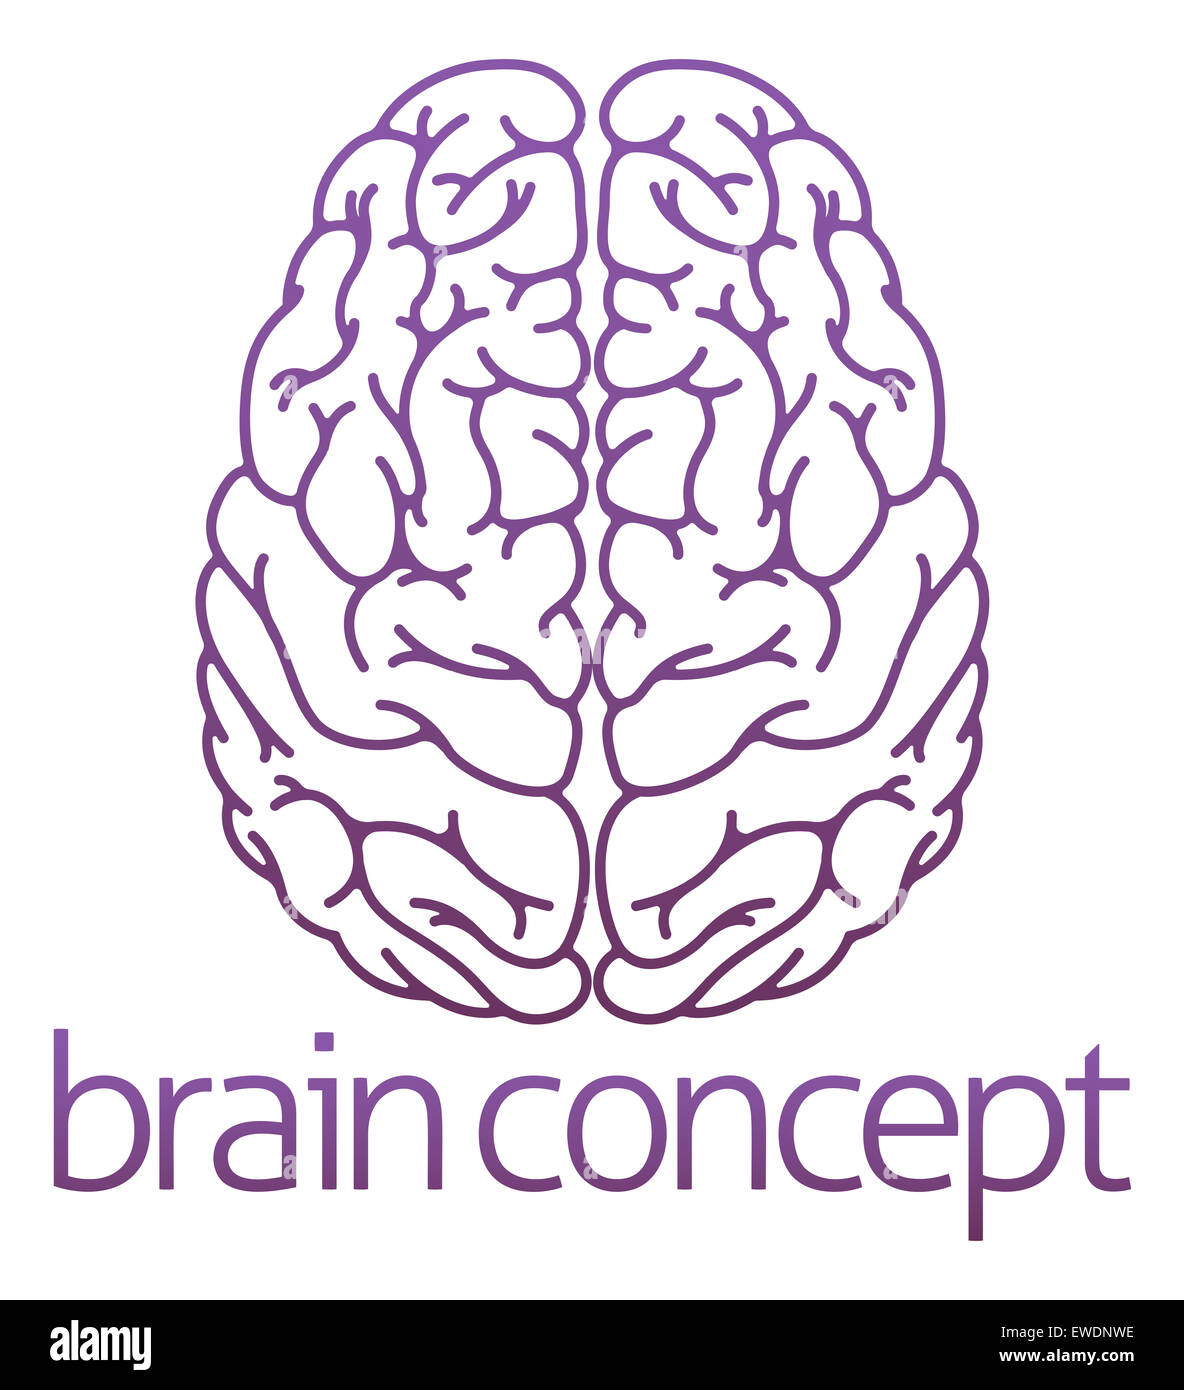 An abstract illustration of a brain concept design Stock Photo